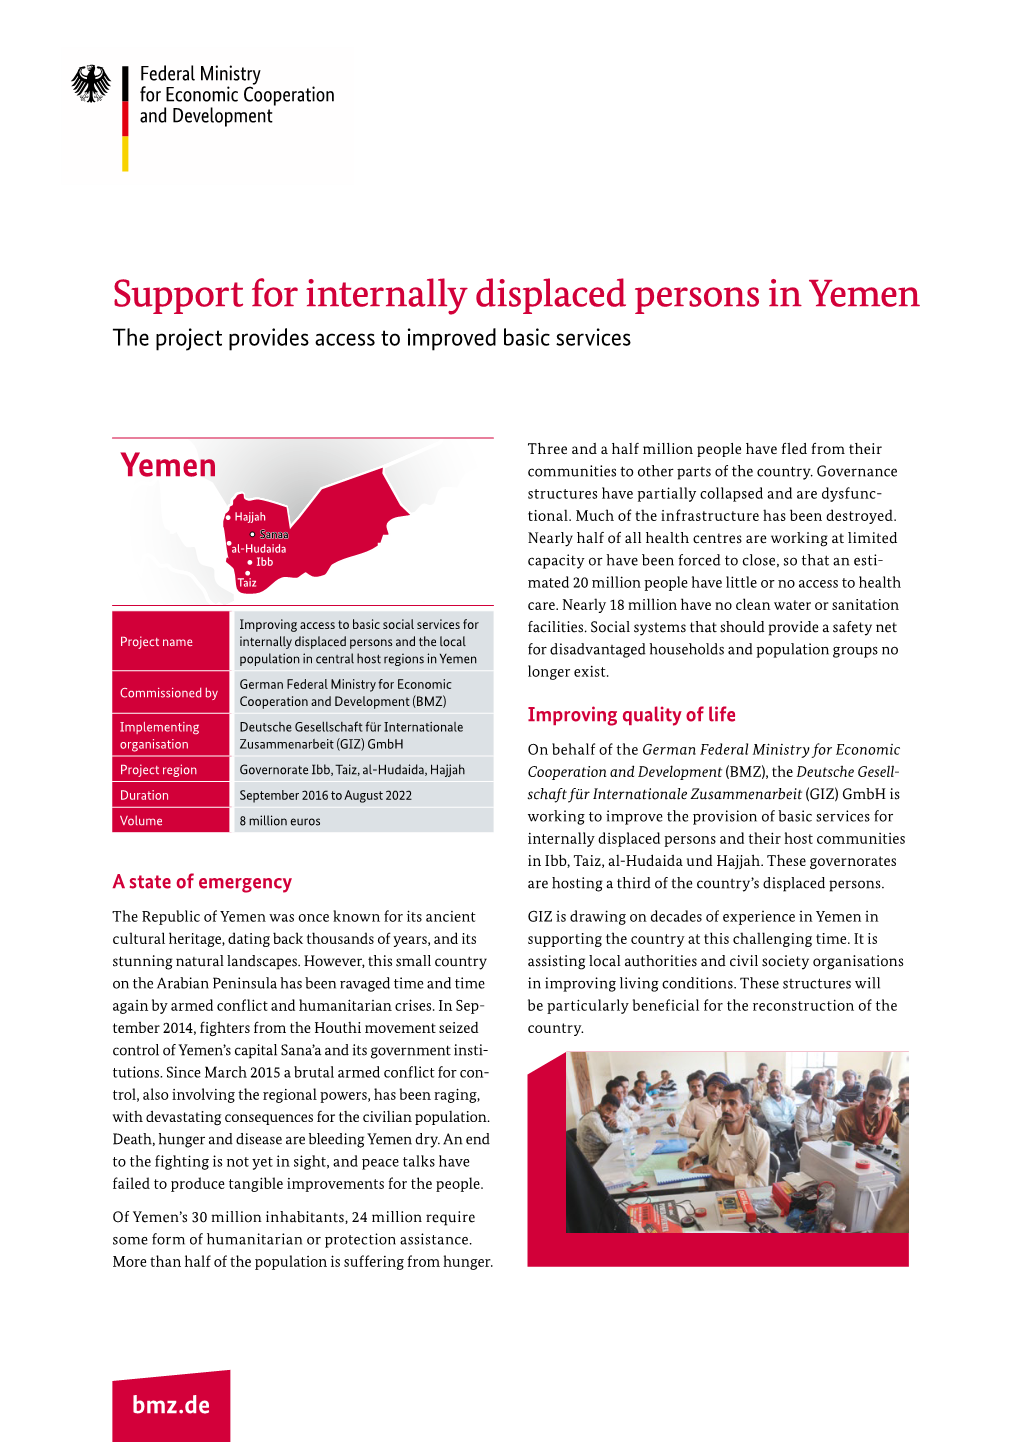 Support for Internally Displaced Persons in Yemen the Project Provides Access to Improved Basic Services